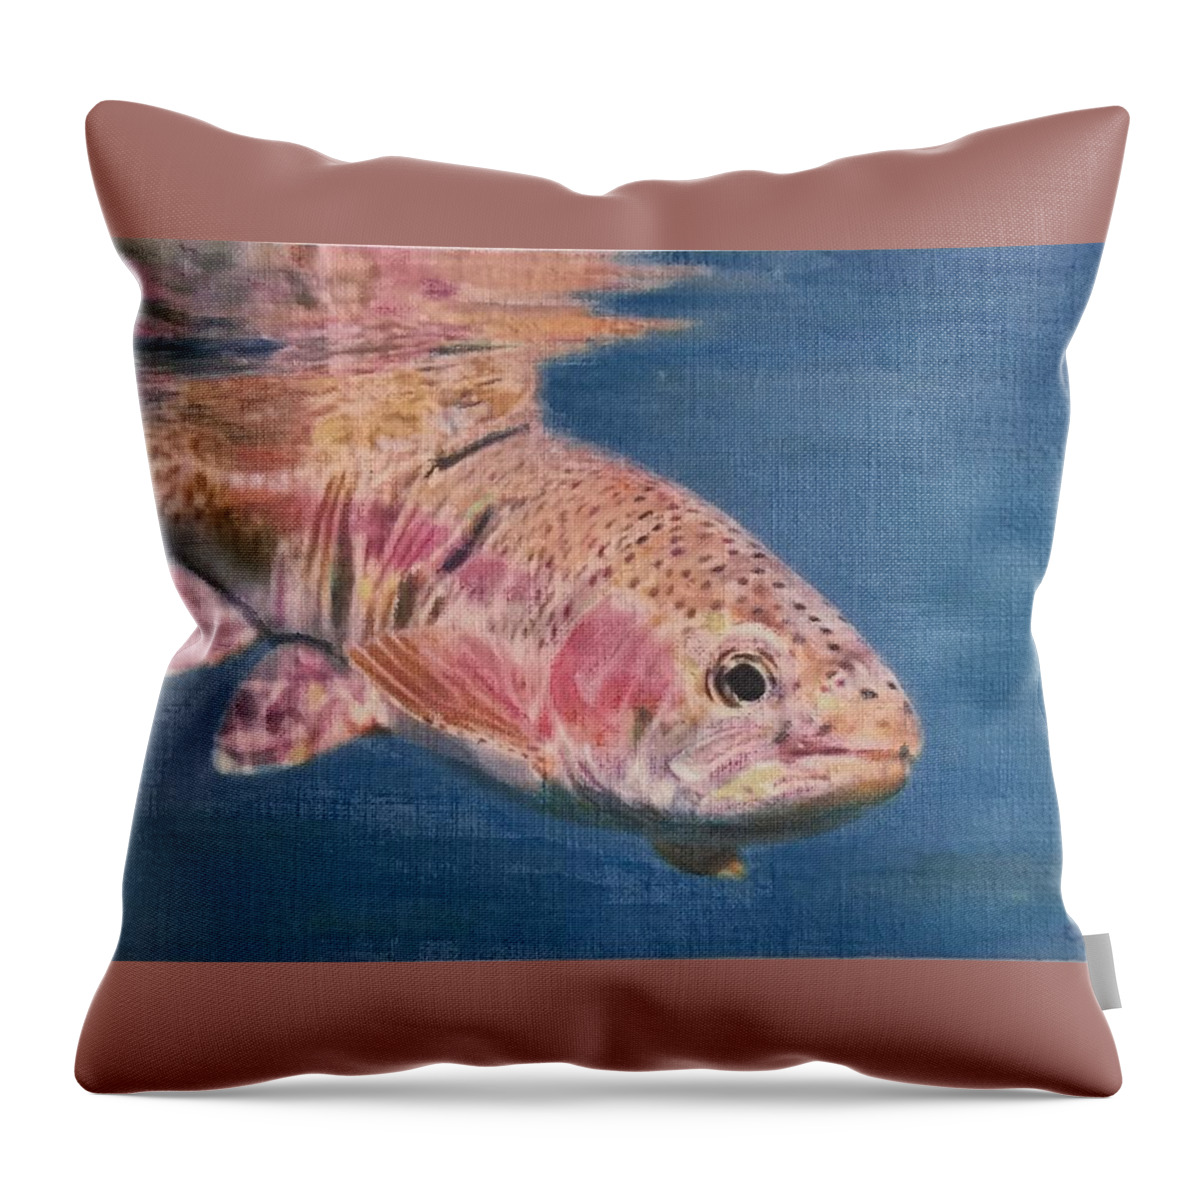 Trout Throw Pillow featuring the painting Curious Trout by Cara Frafjord